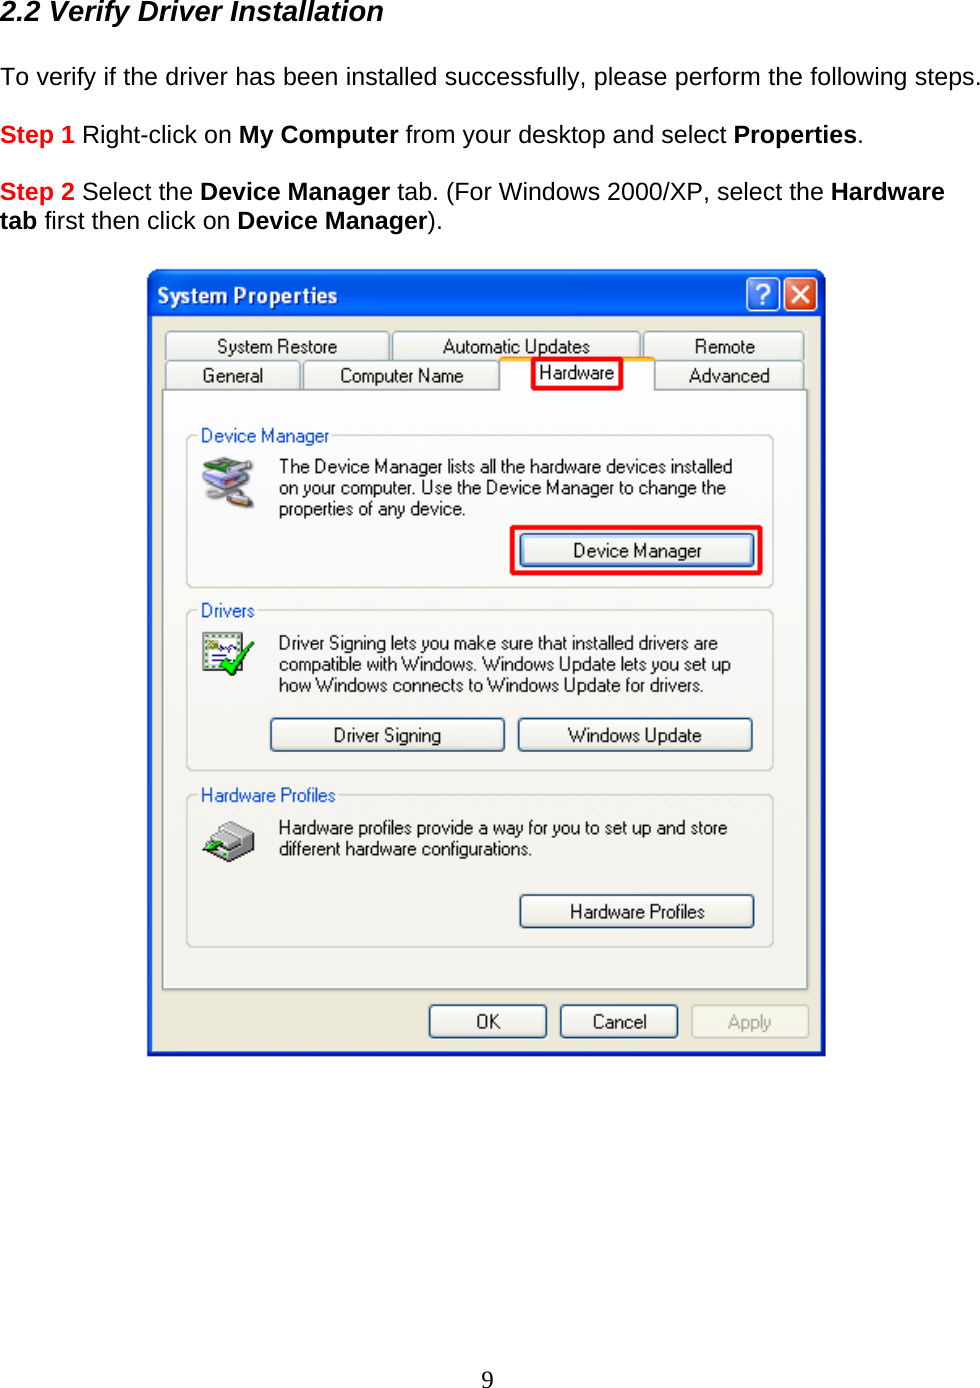 9 2.2 Verify Driver Installation  To verify if the driver has been installed successfully, please perform the following steps.  Step 1 Right-click on My Computer from your desktop and select Properties.  Step 2 Select the Device Manager tab. (For Windows 2000/XP, select the Hardware tab first then click on Device Manager).           